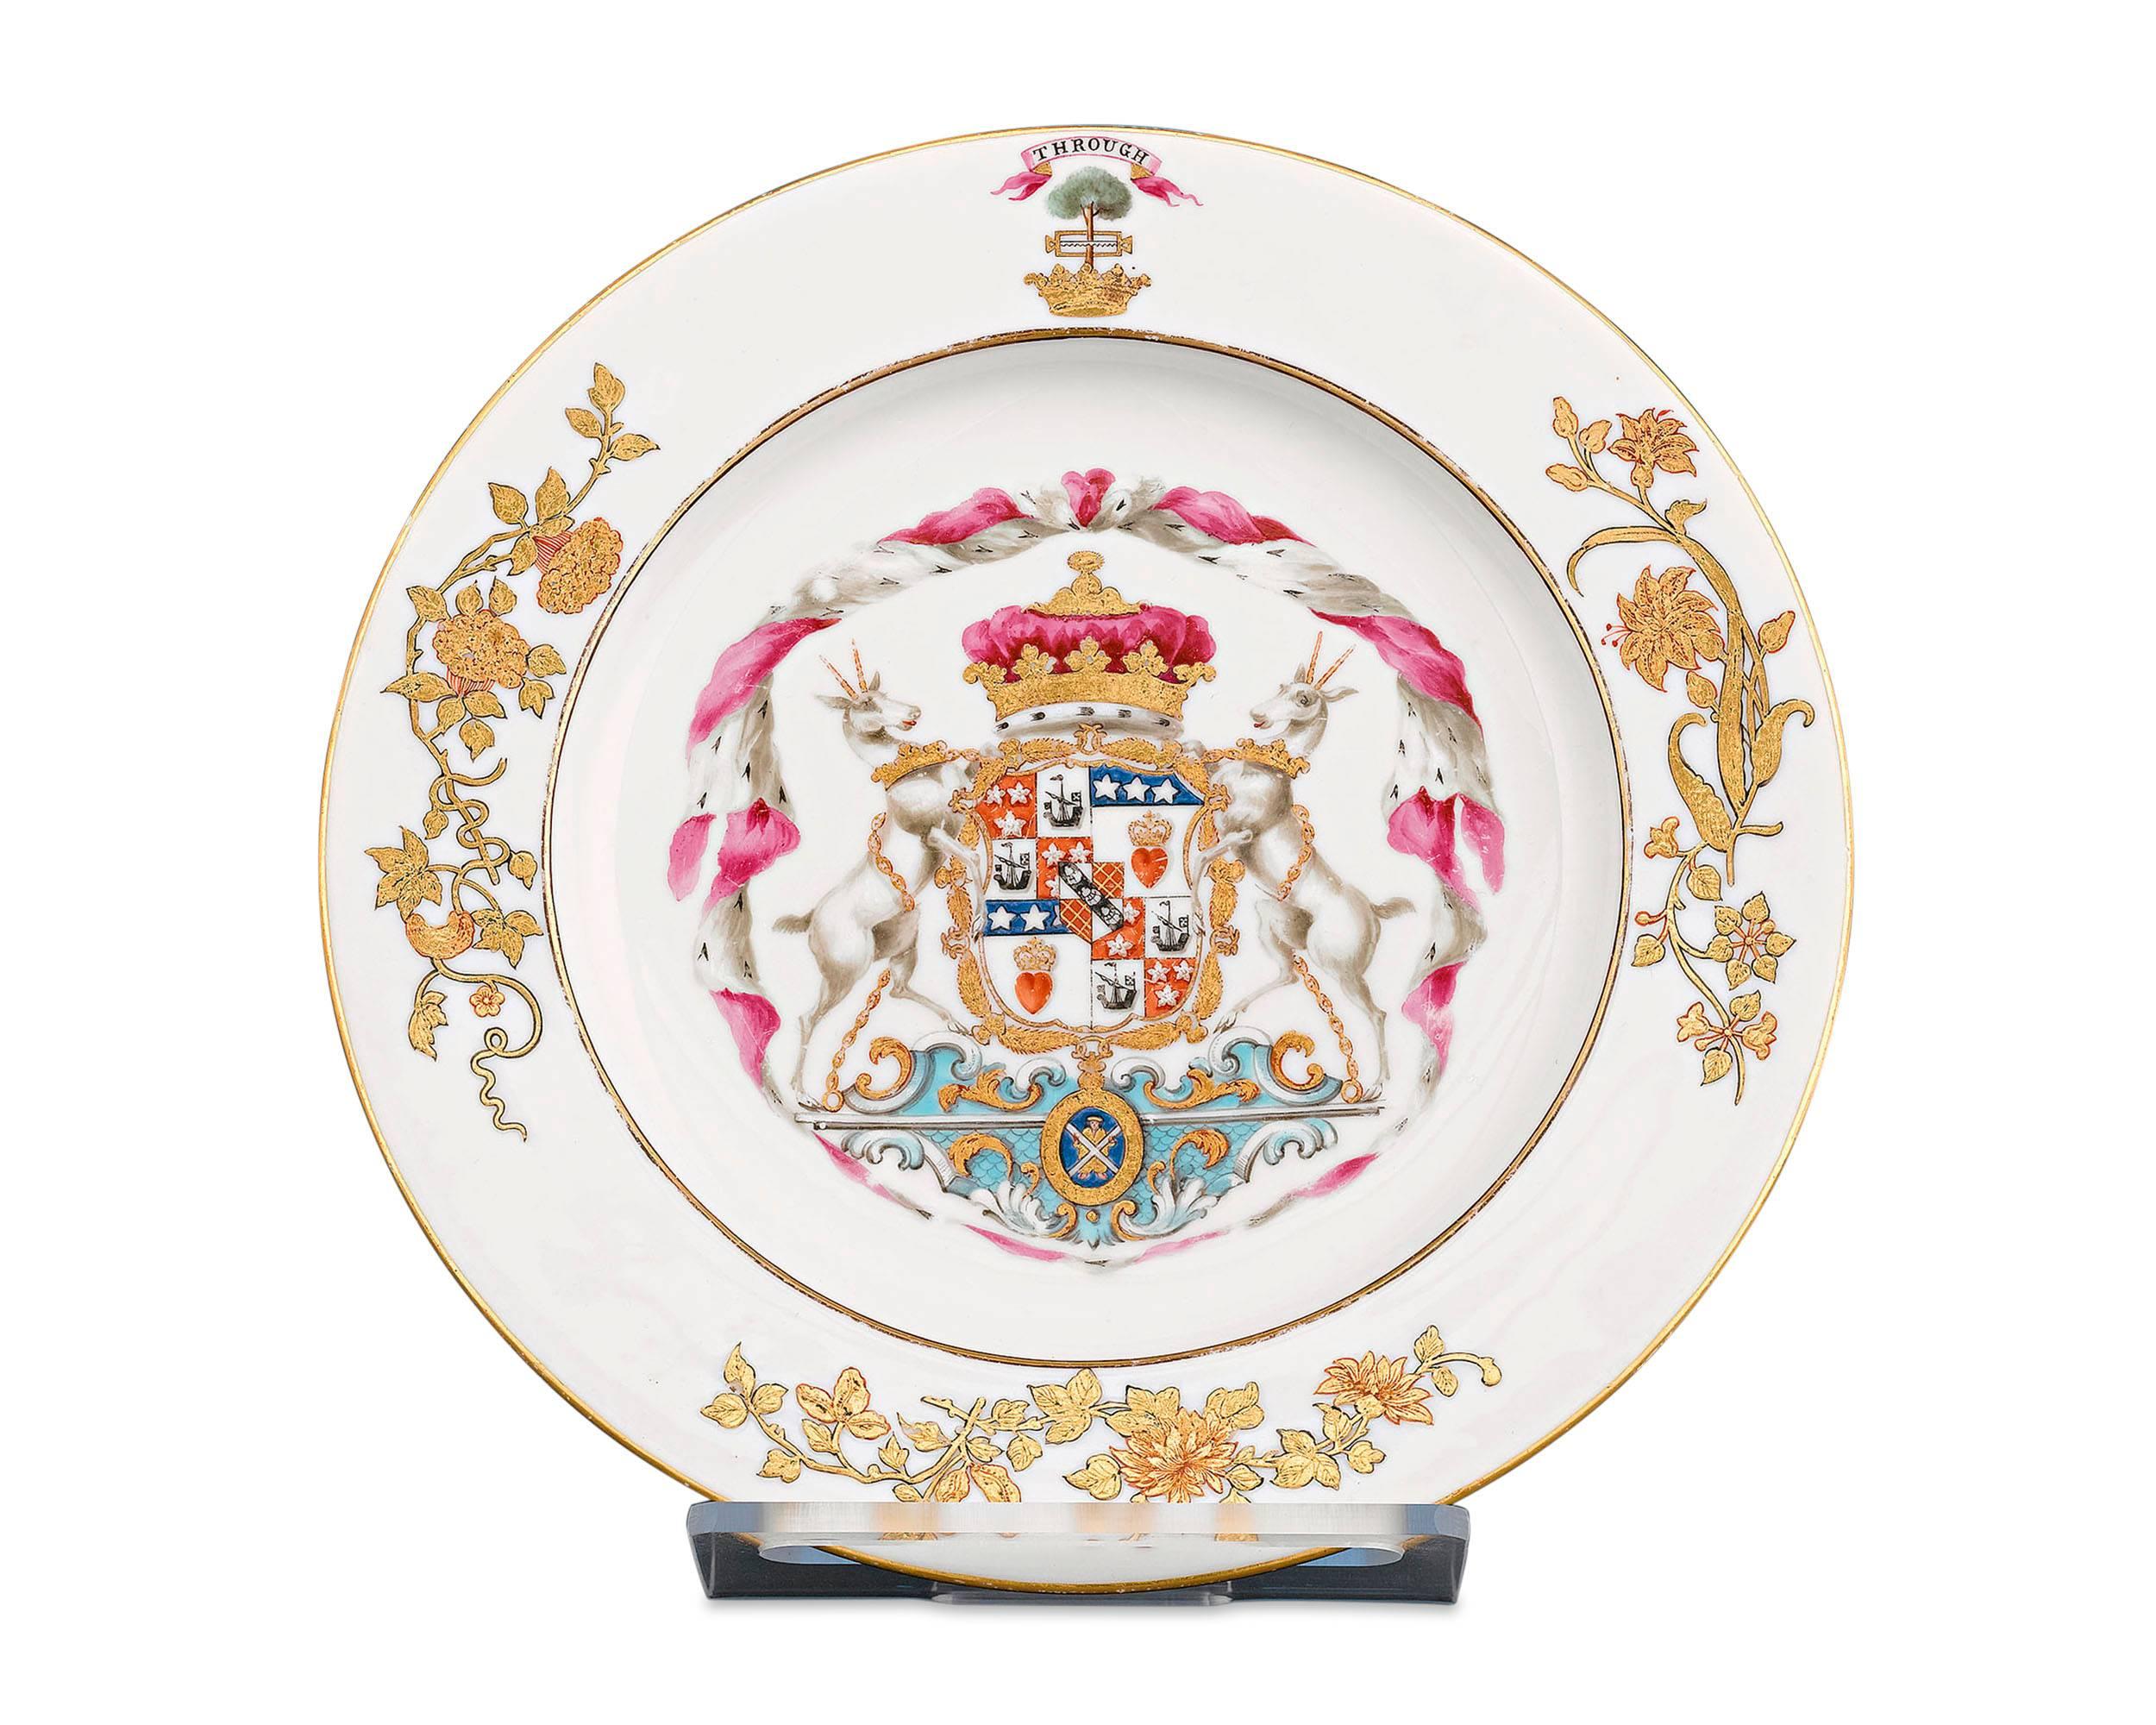 Exceptional in both craftsmanship and provenance, this outstanding porcelain service boasts a prestigious lineage. Crafted by the renowned Derby and Duesbury manufacturers, this remarkable service was specially commissioned by Douglas, the 8th Duke